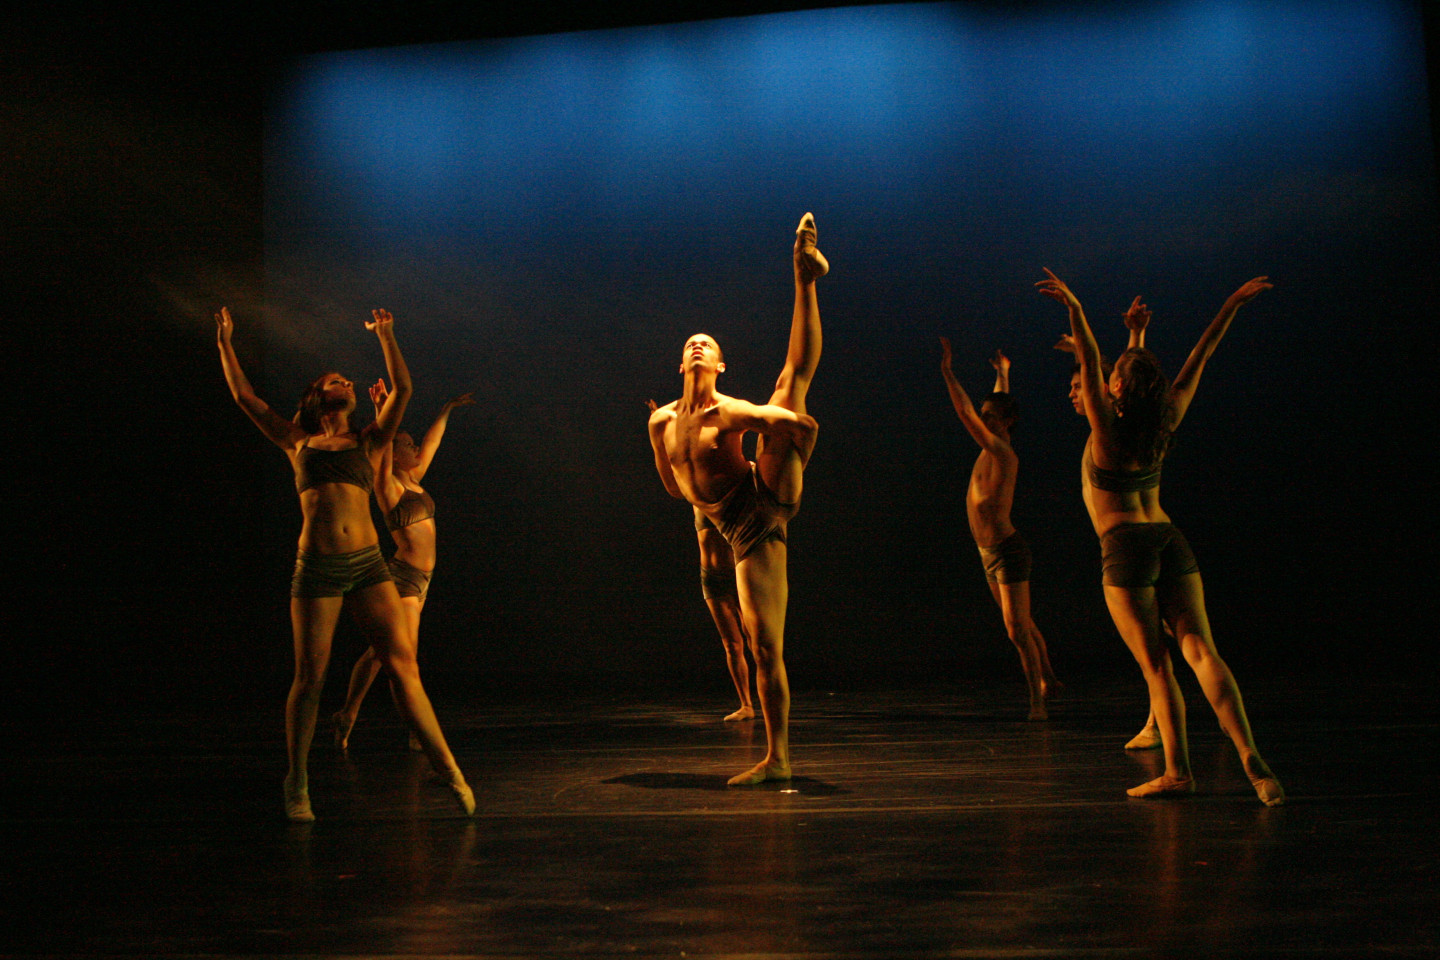 Dancers on stage.